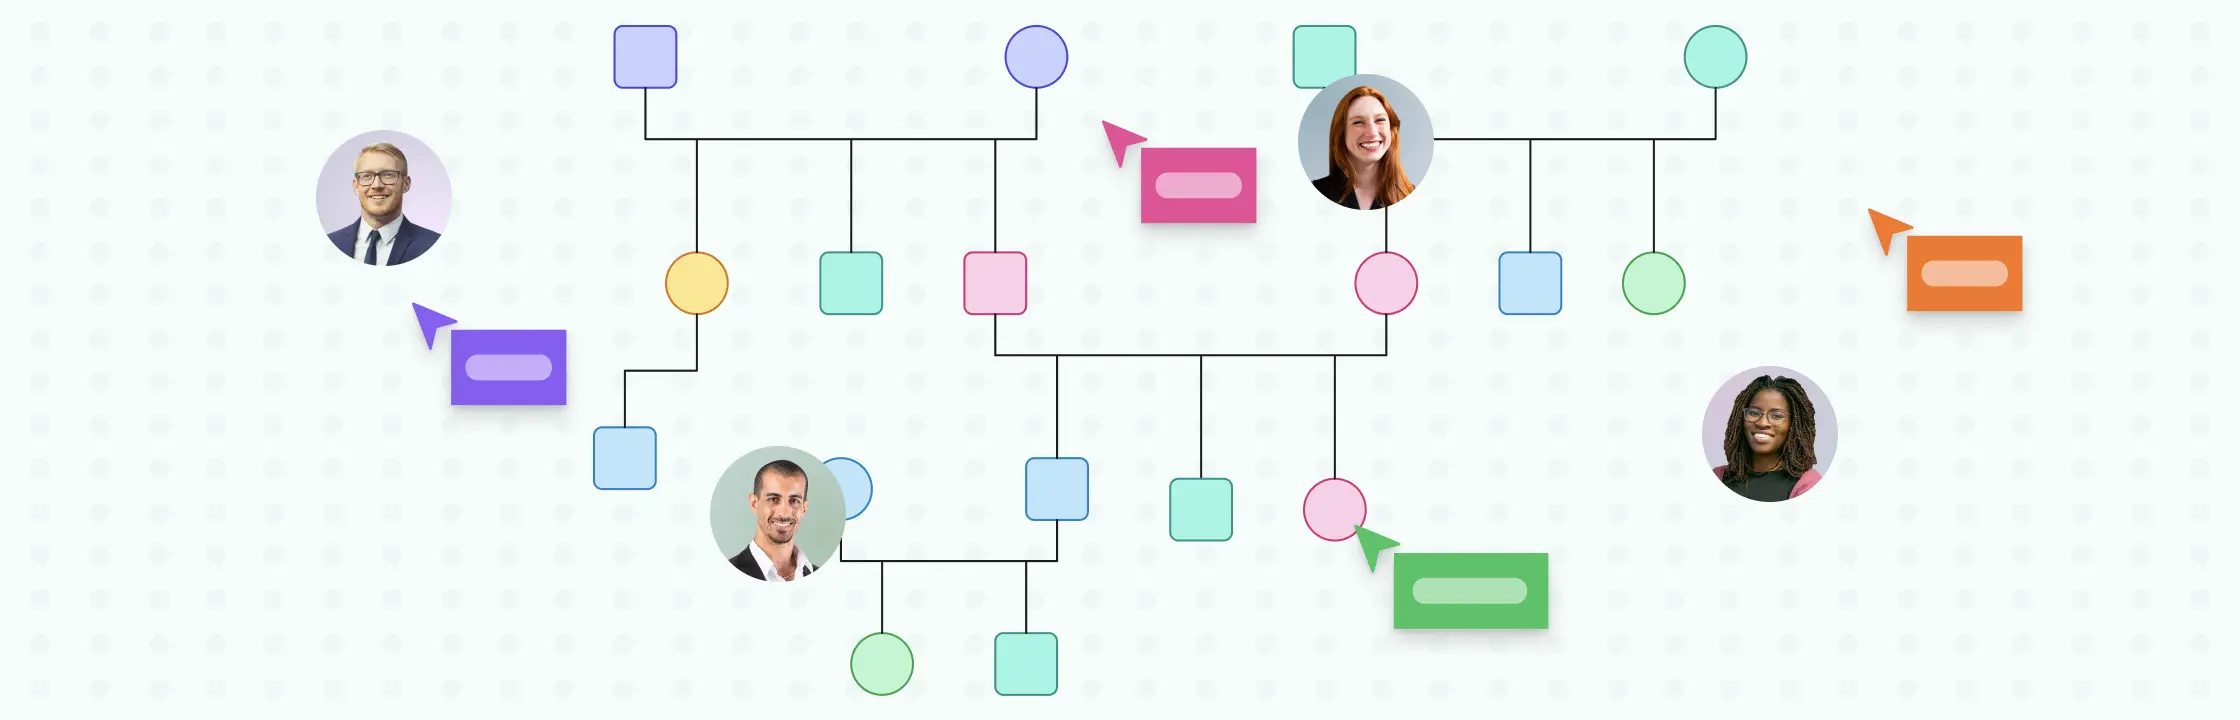 How to Conduct a Genogram Interview Effectively